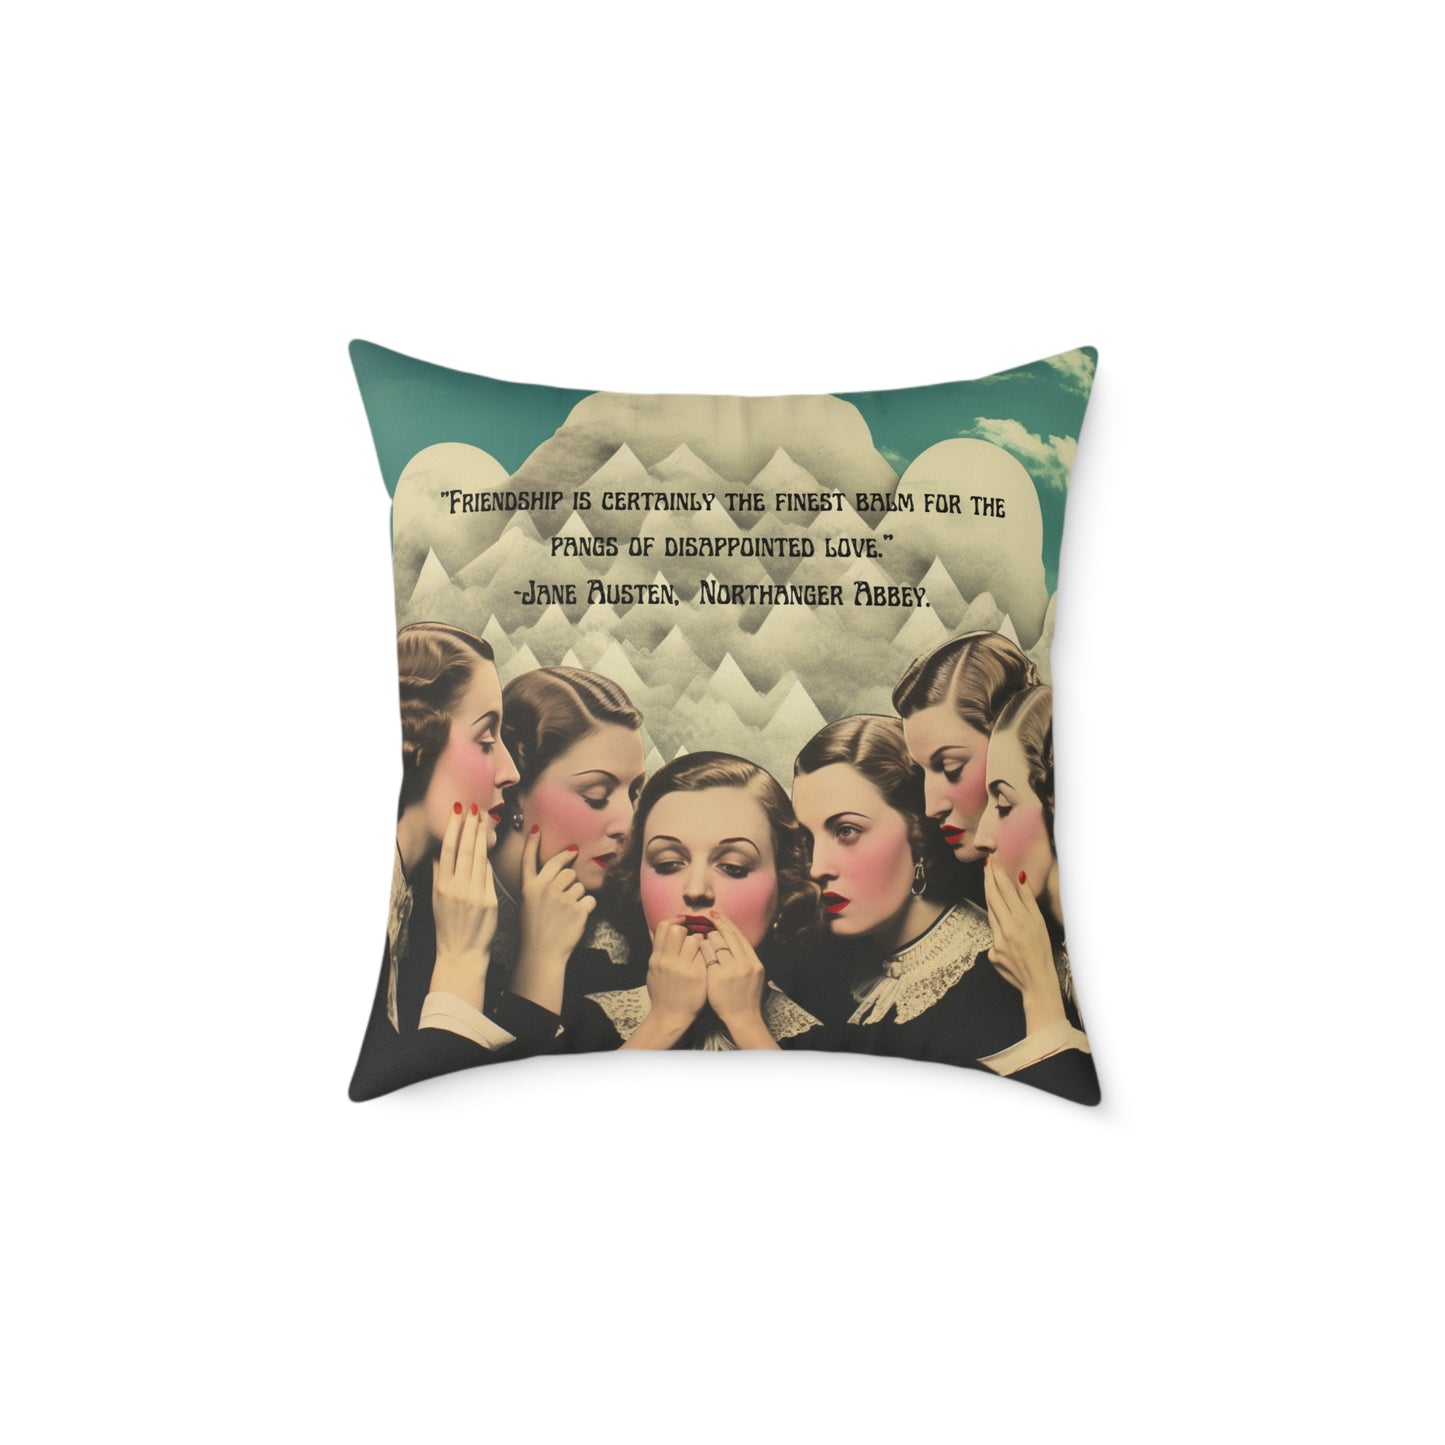 "Friendship Balm" from Northanger Abbey, by Jane Austen quote, Luxury Cushion